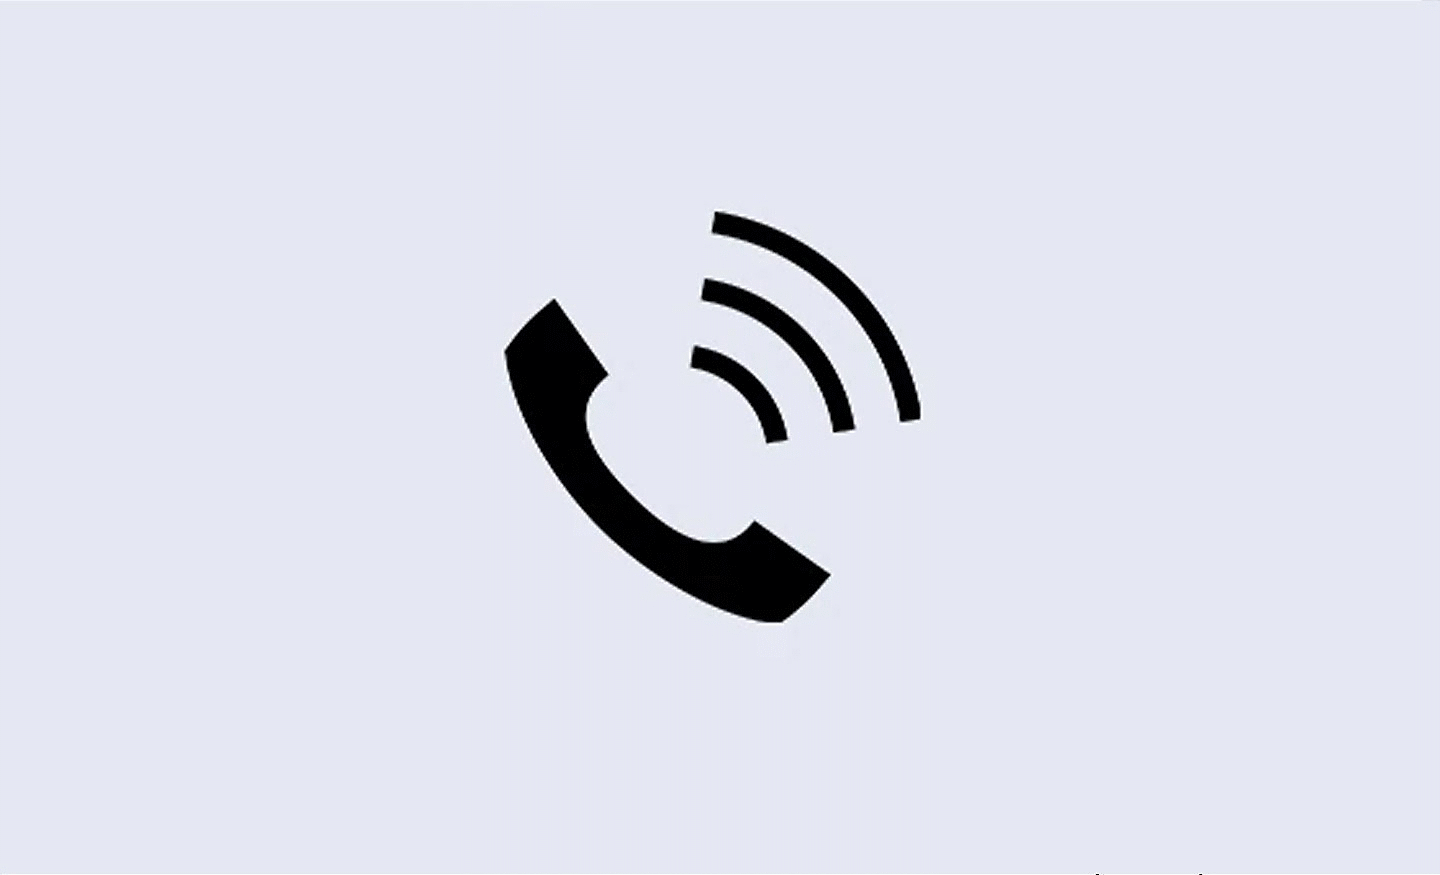 Image of a phone icon with three curved lines above it